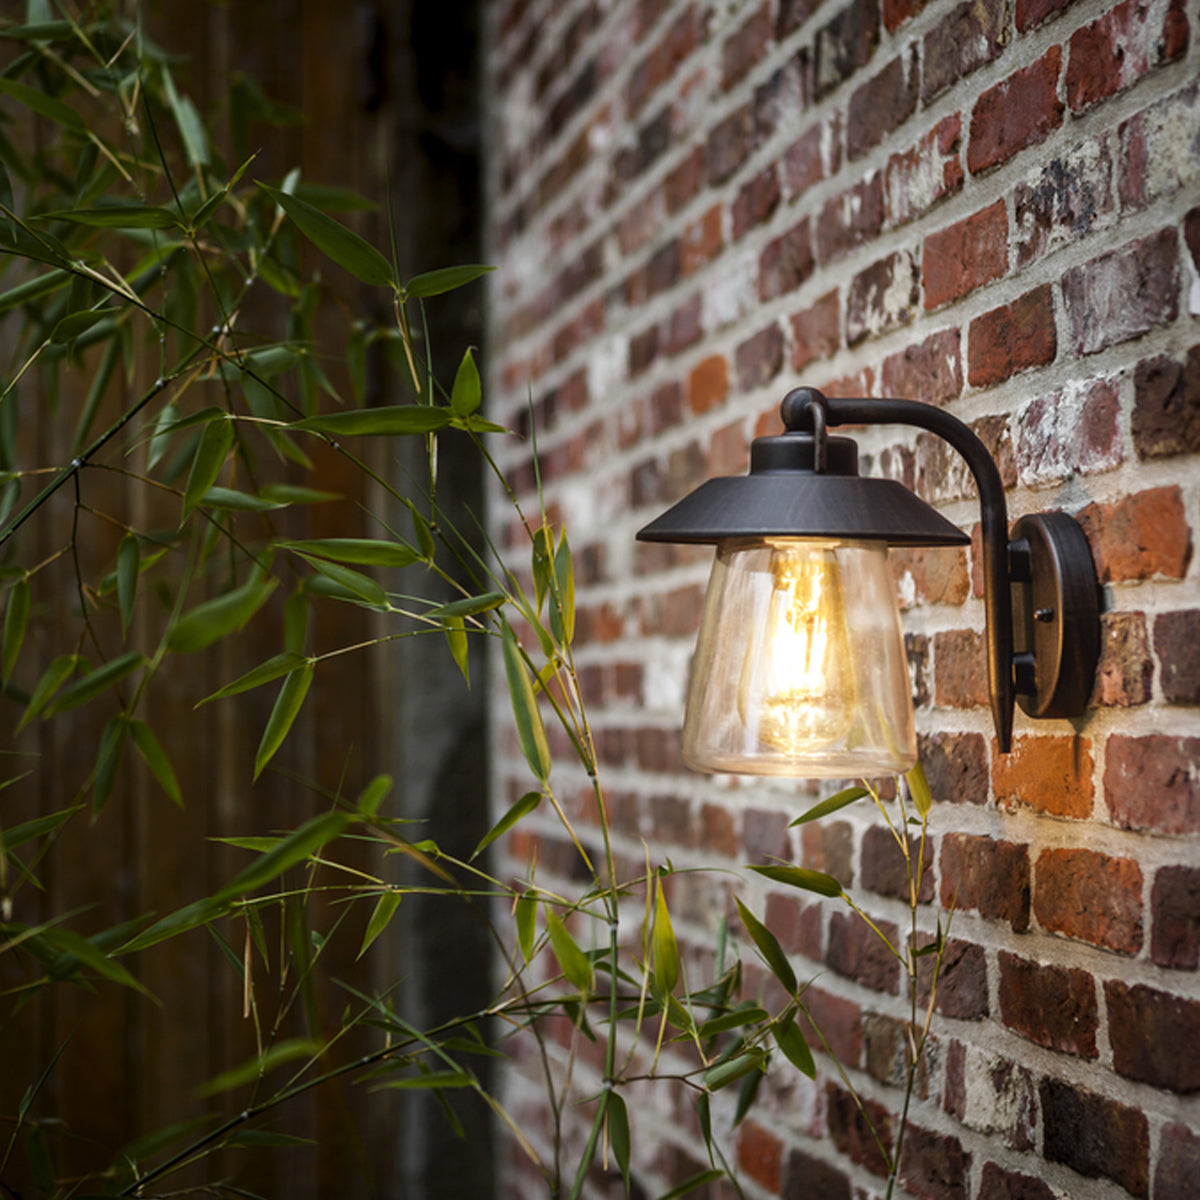 Black matt with washed bronze finish Applicable to walls Vintage styled light with metal framing and weathered looks. E27 bulb (not included), 60W max IP44 Rated for outdoor use, 220-240V mains power, ambient temperature -20 to +30, class 1 Height: 20 cm Width: 22.5 cm Shade Diameter: 17.6 cm